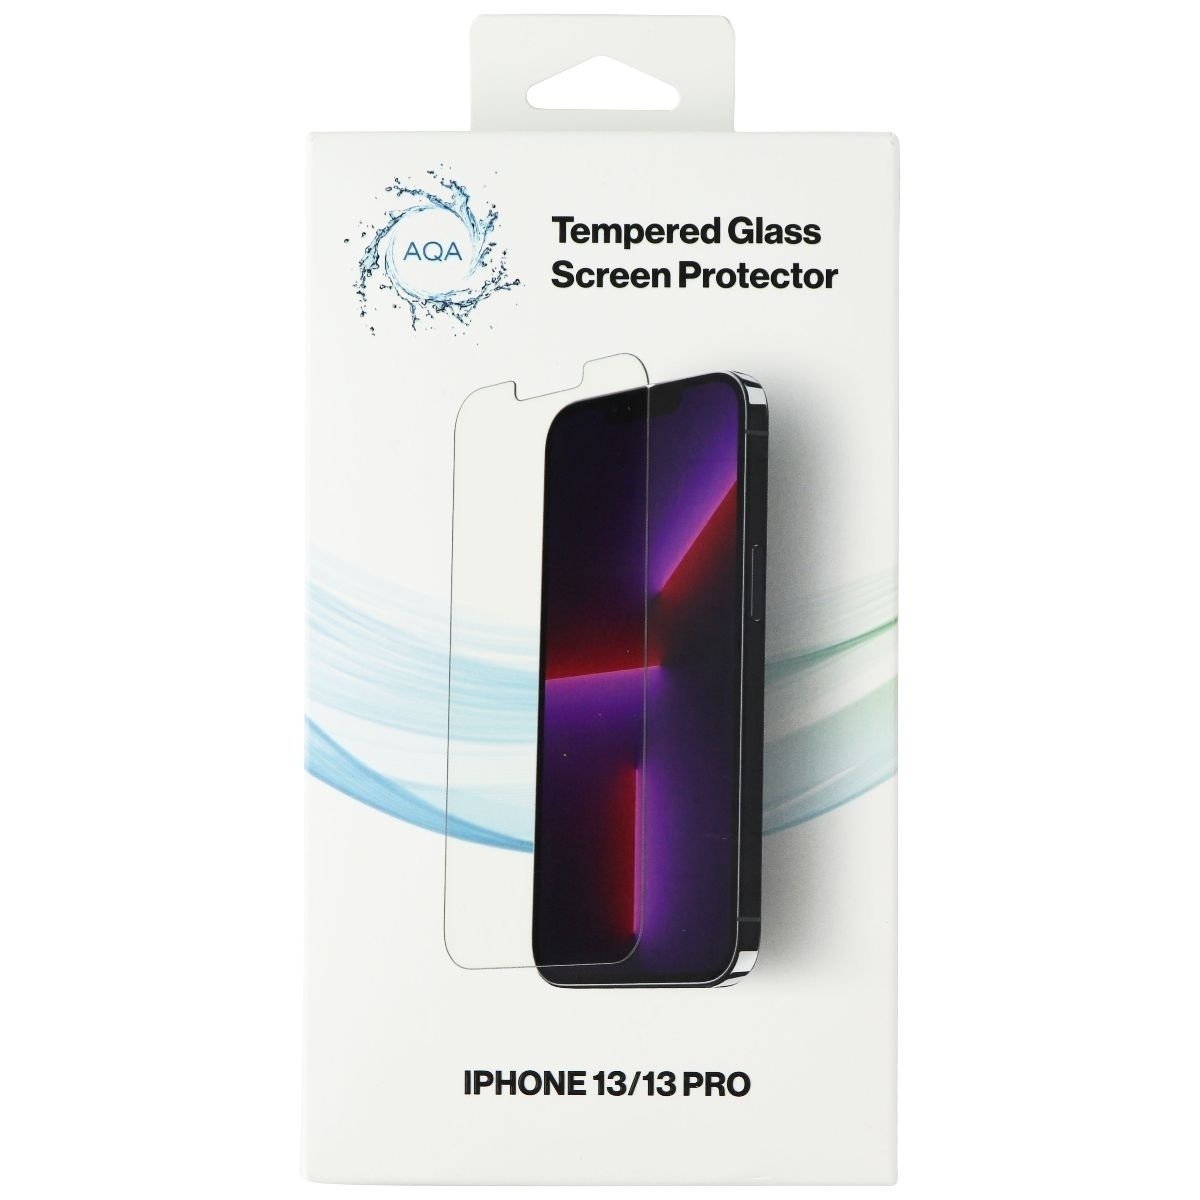 AQA Tempered Glass Screen Protector For IPhone 13 And IPhone 13 Pro - Clear